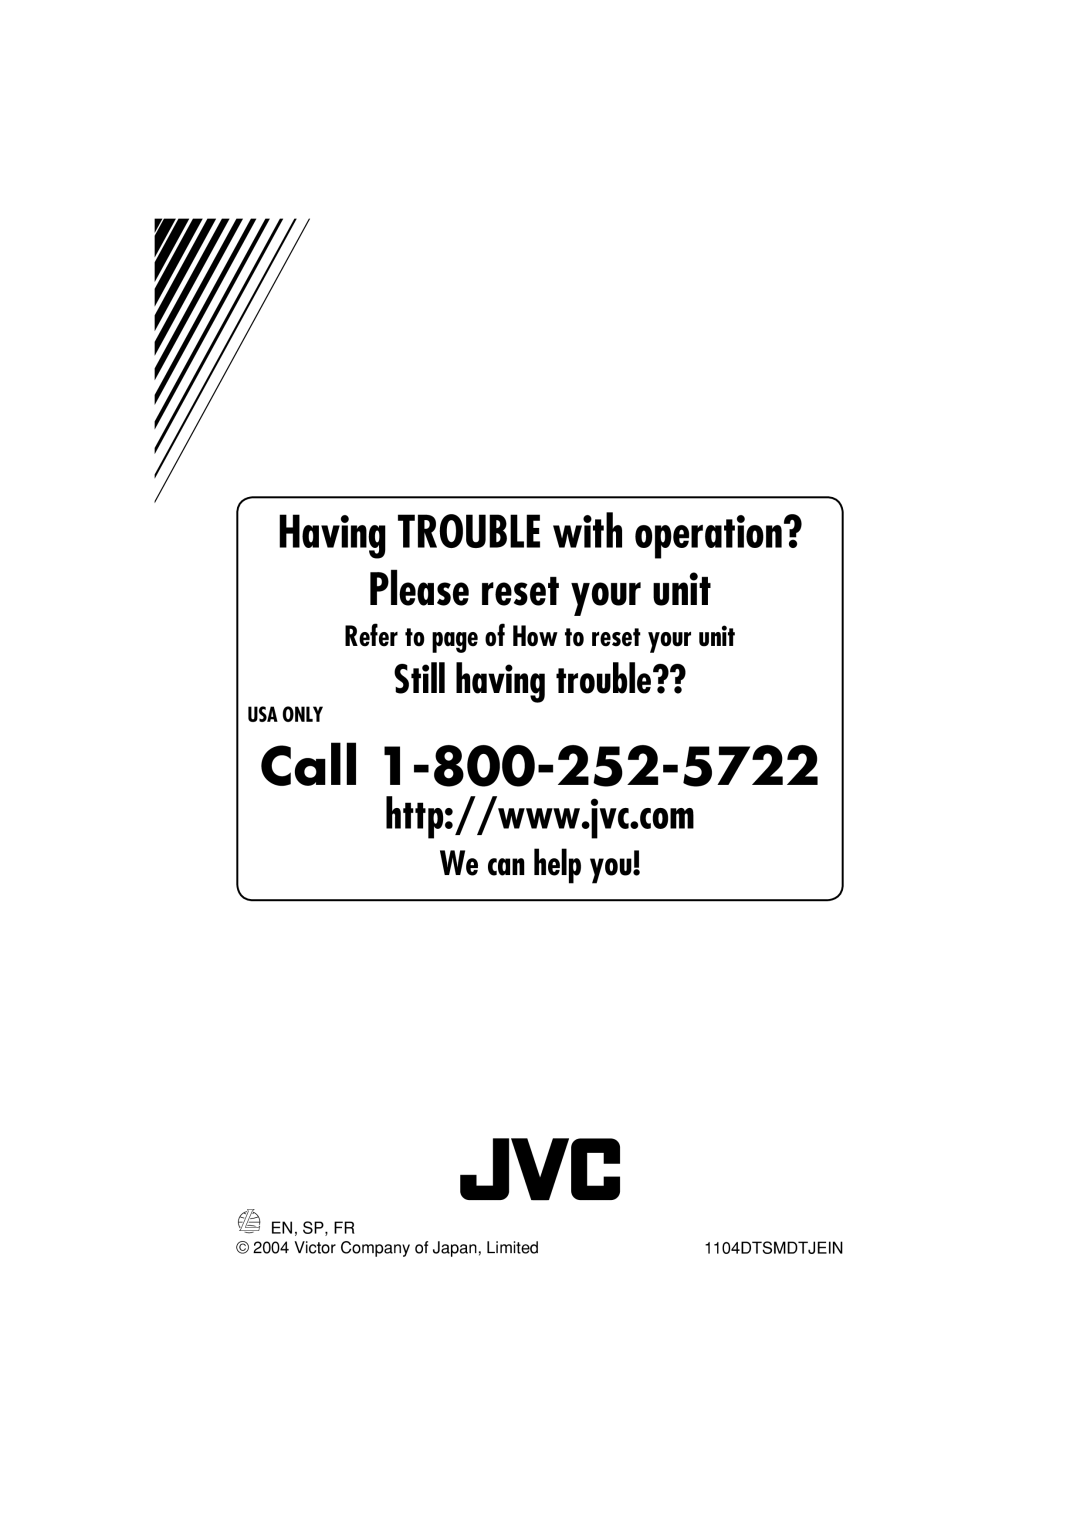 JVC KD-S51 manual We can help you, Refer to page of How to reset your unit, Usa Only, Call, Please reset your unit 